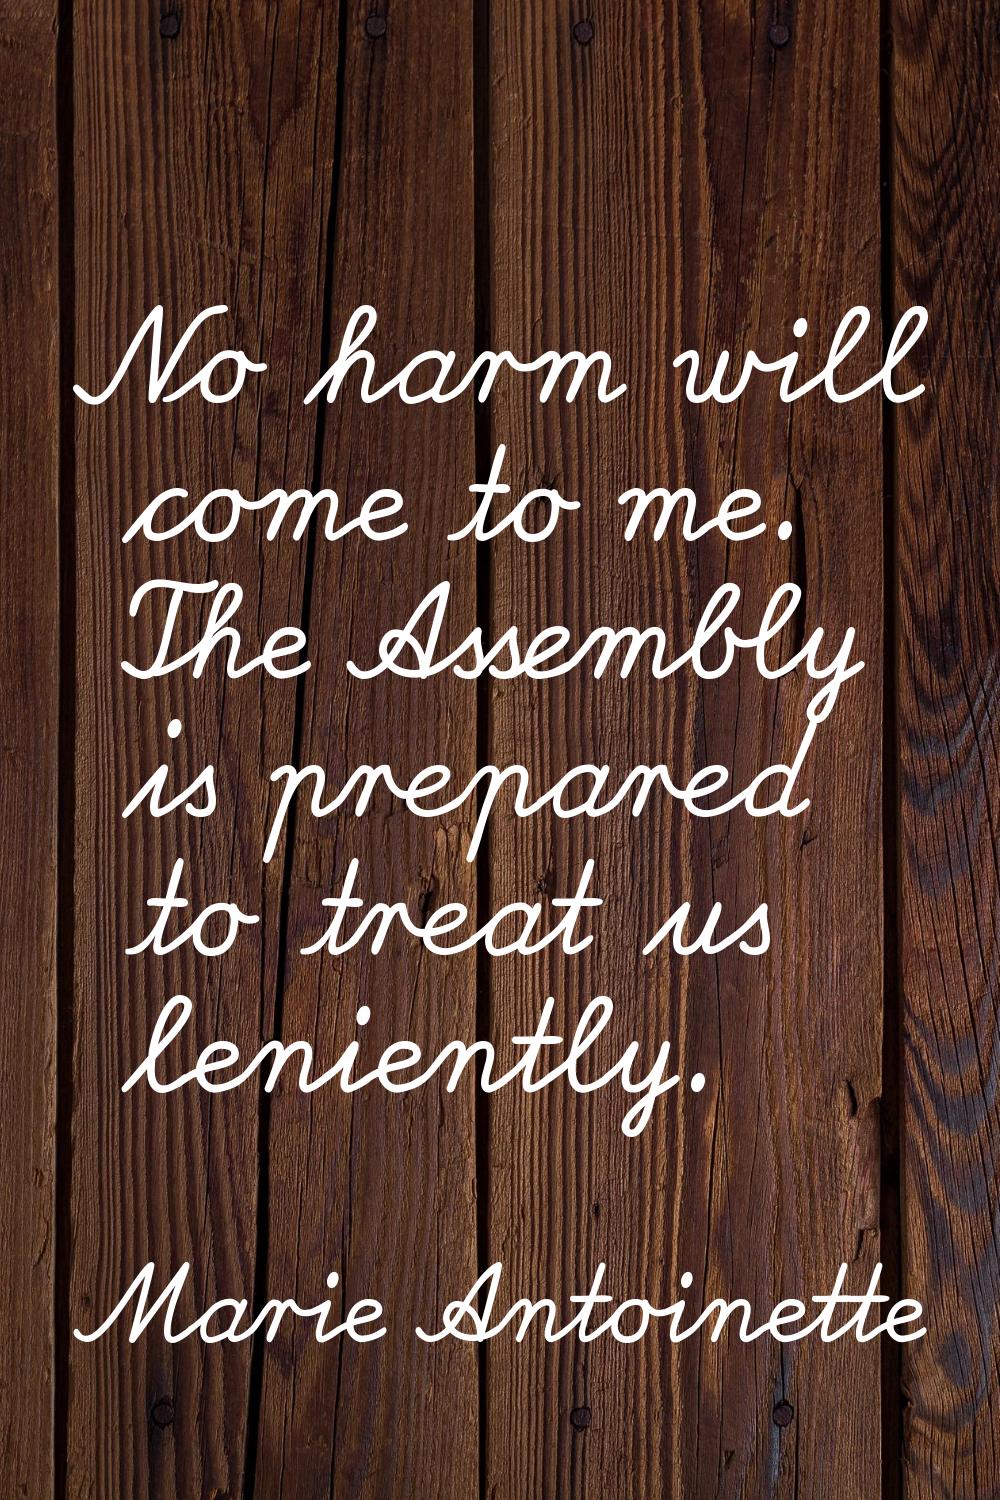 No harm will come to me. The Assembly is prepared to treat us leniently.